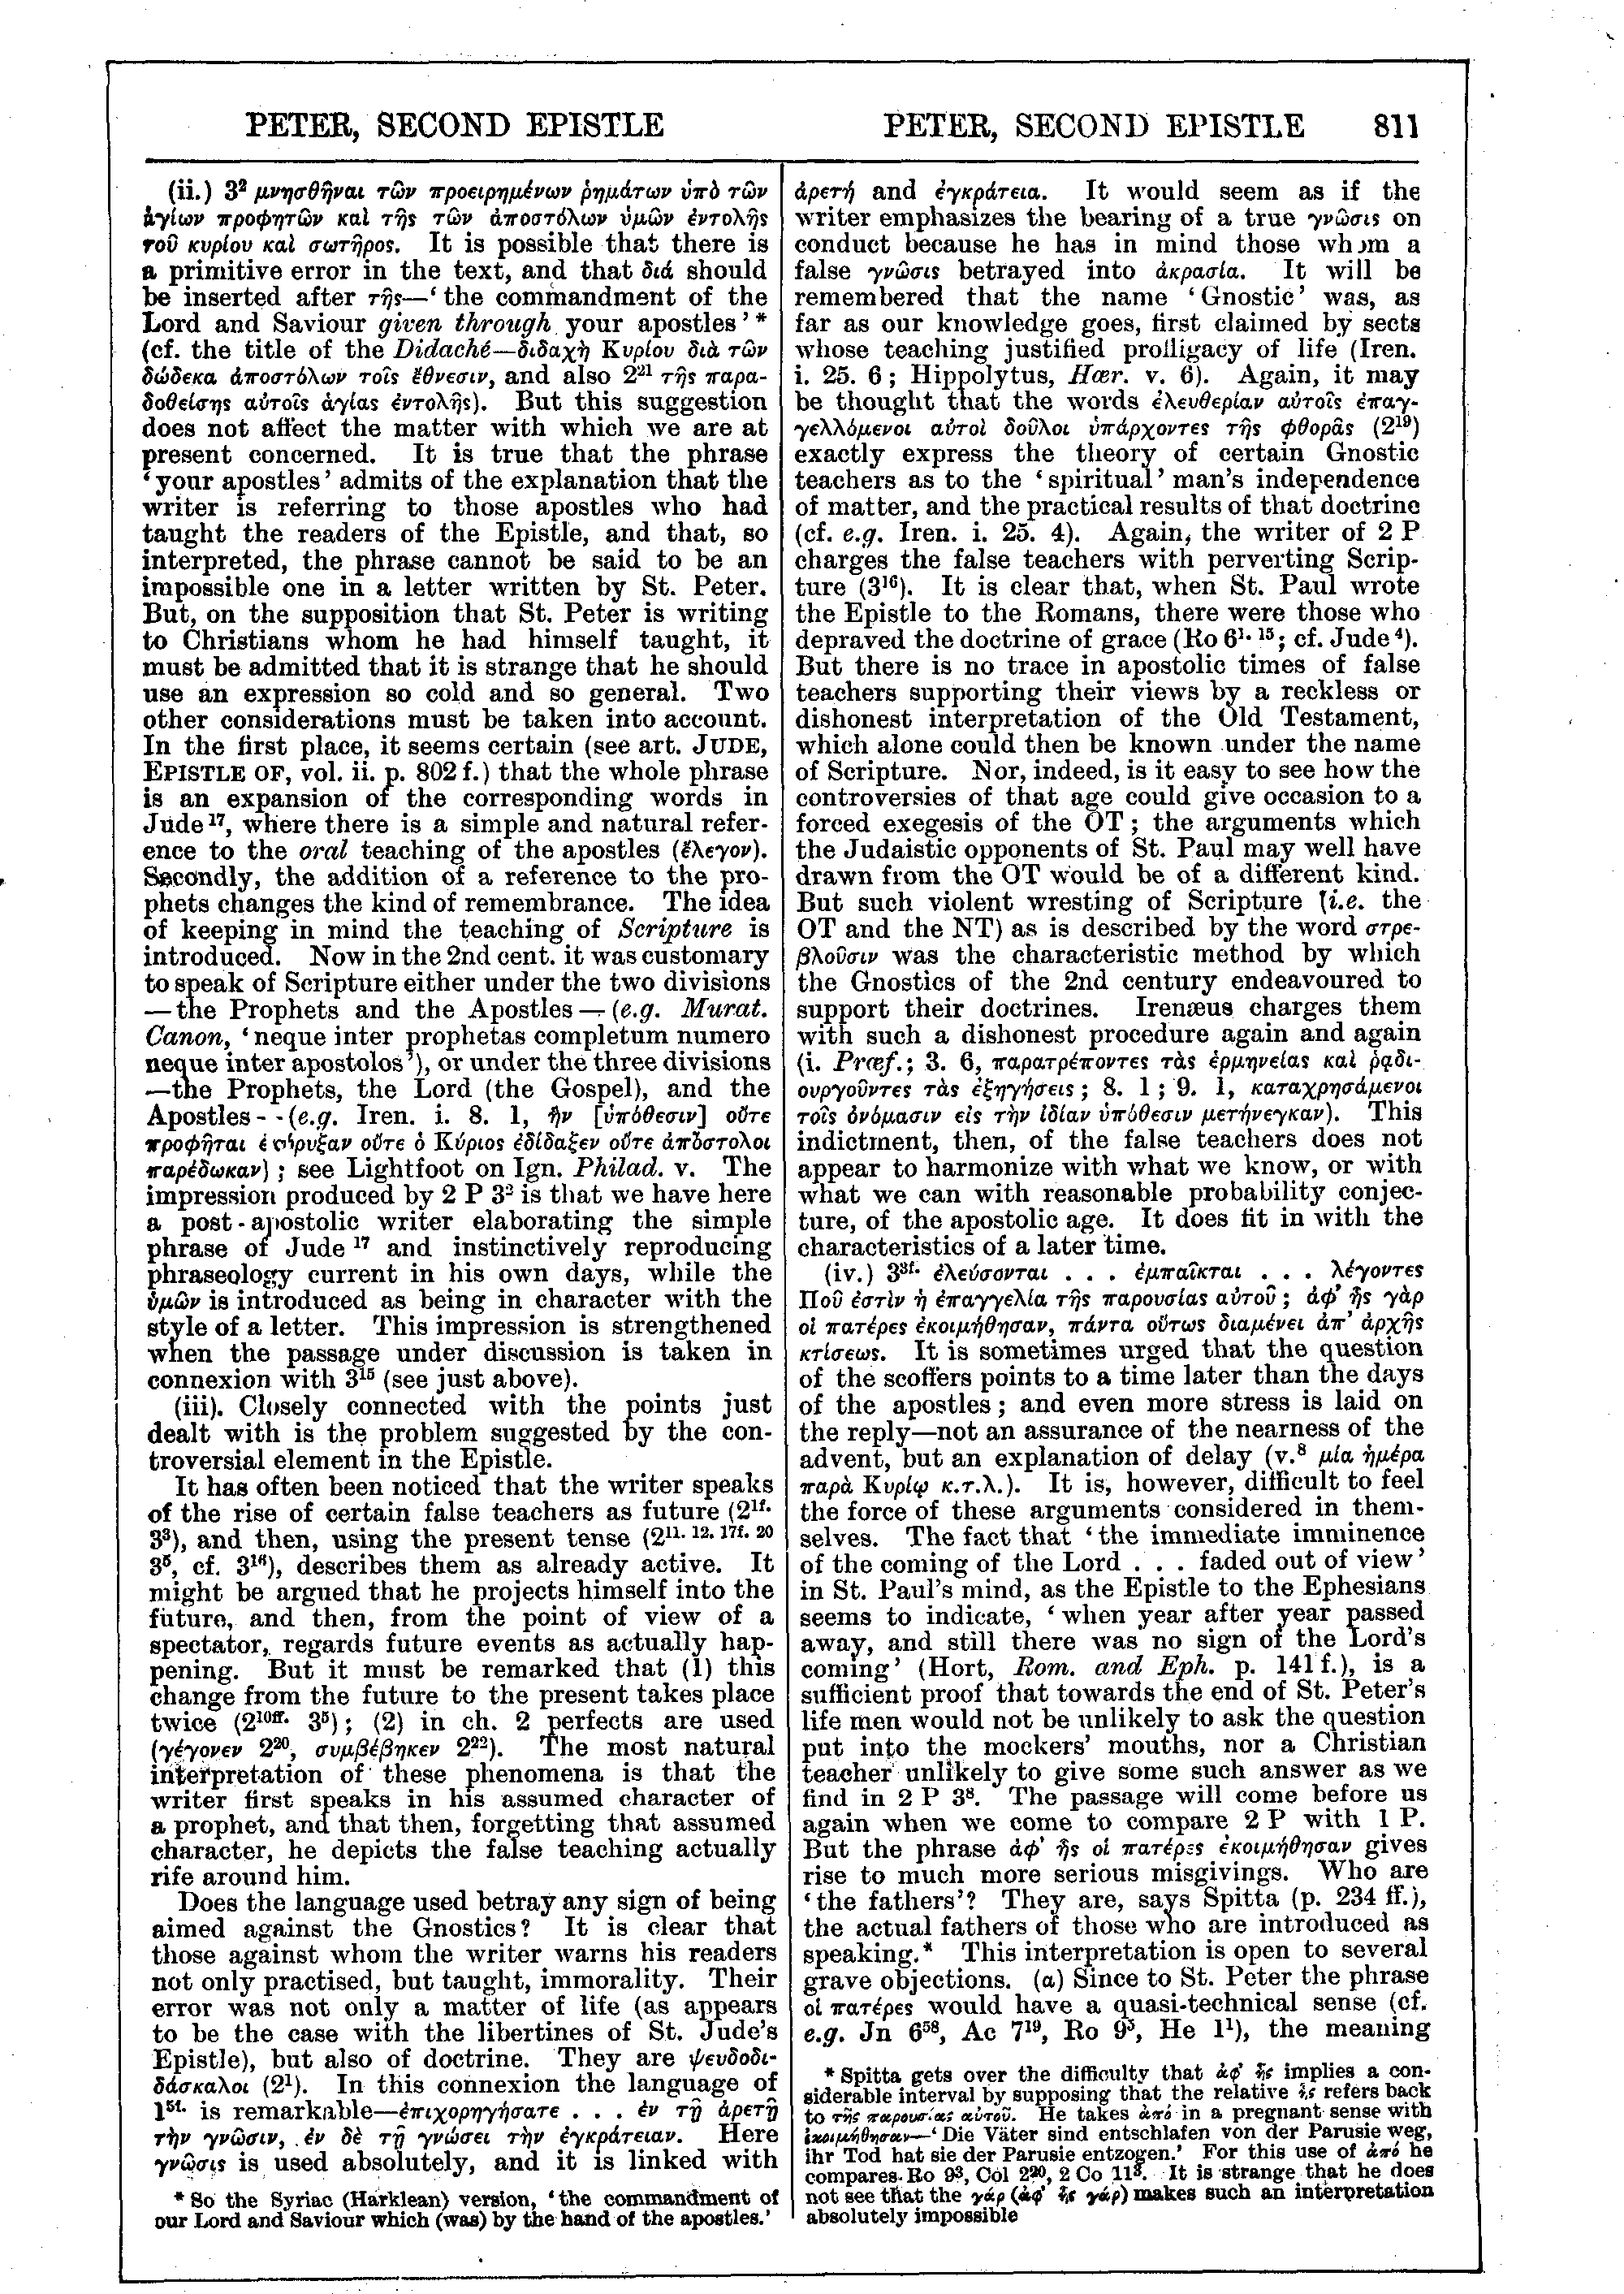 Image of page 811